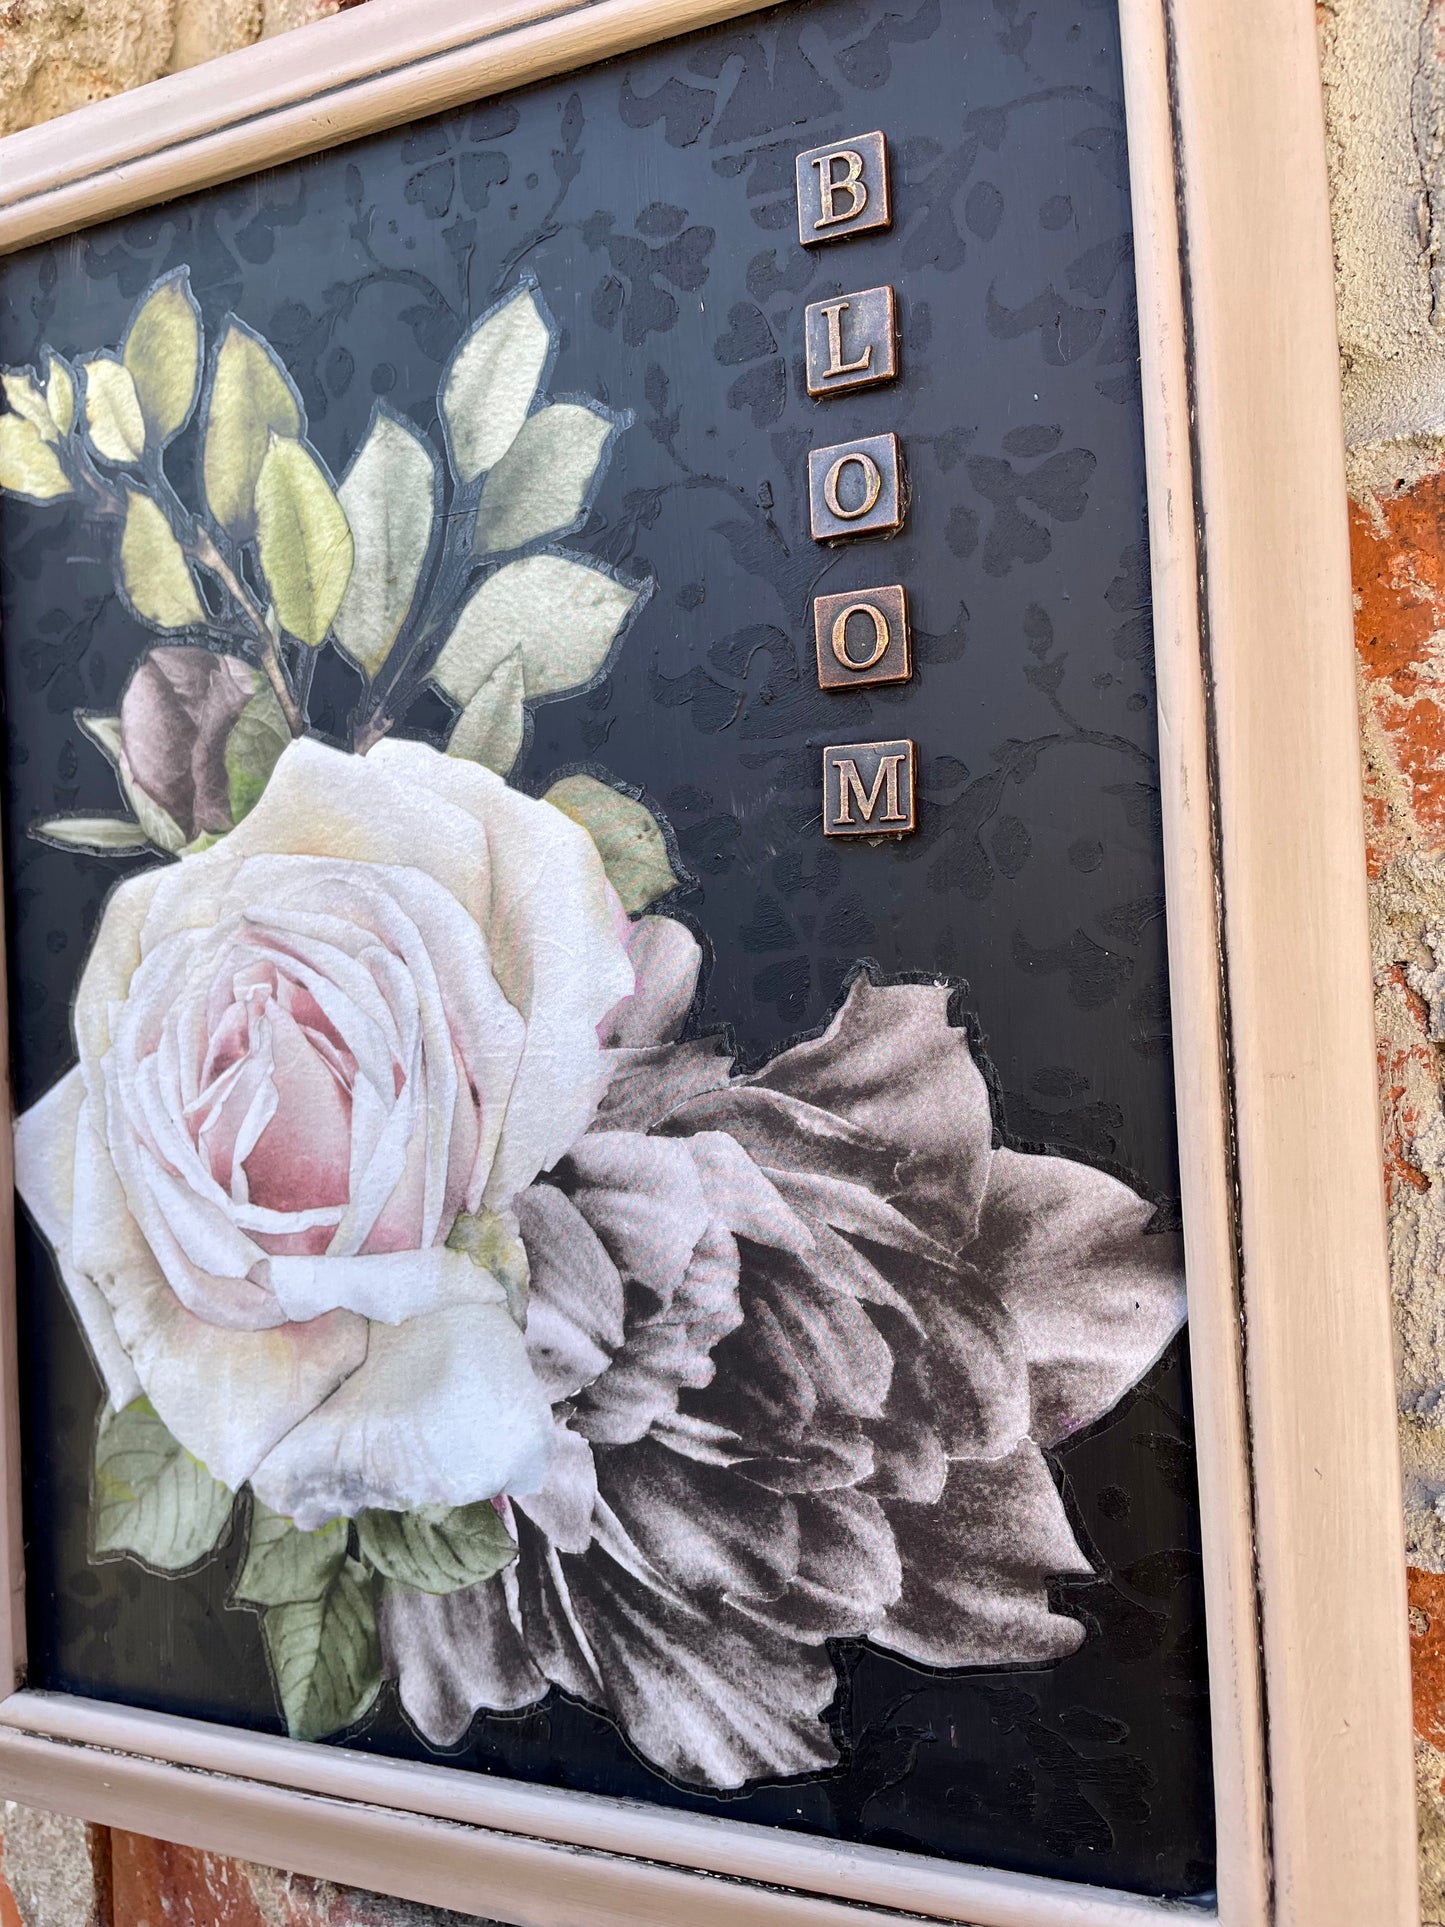 Handmade Upcycled Picture Frame “Bloom” Sign